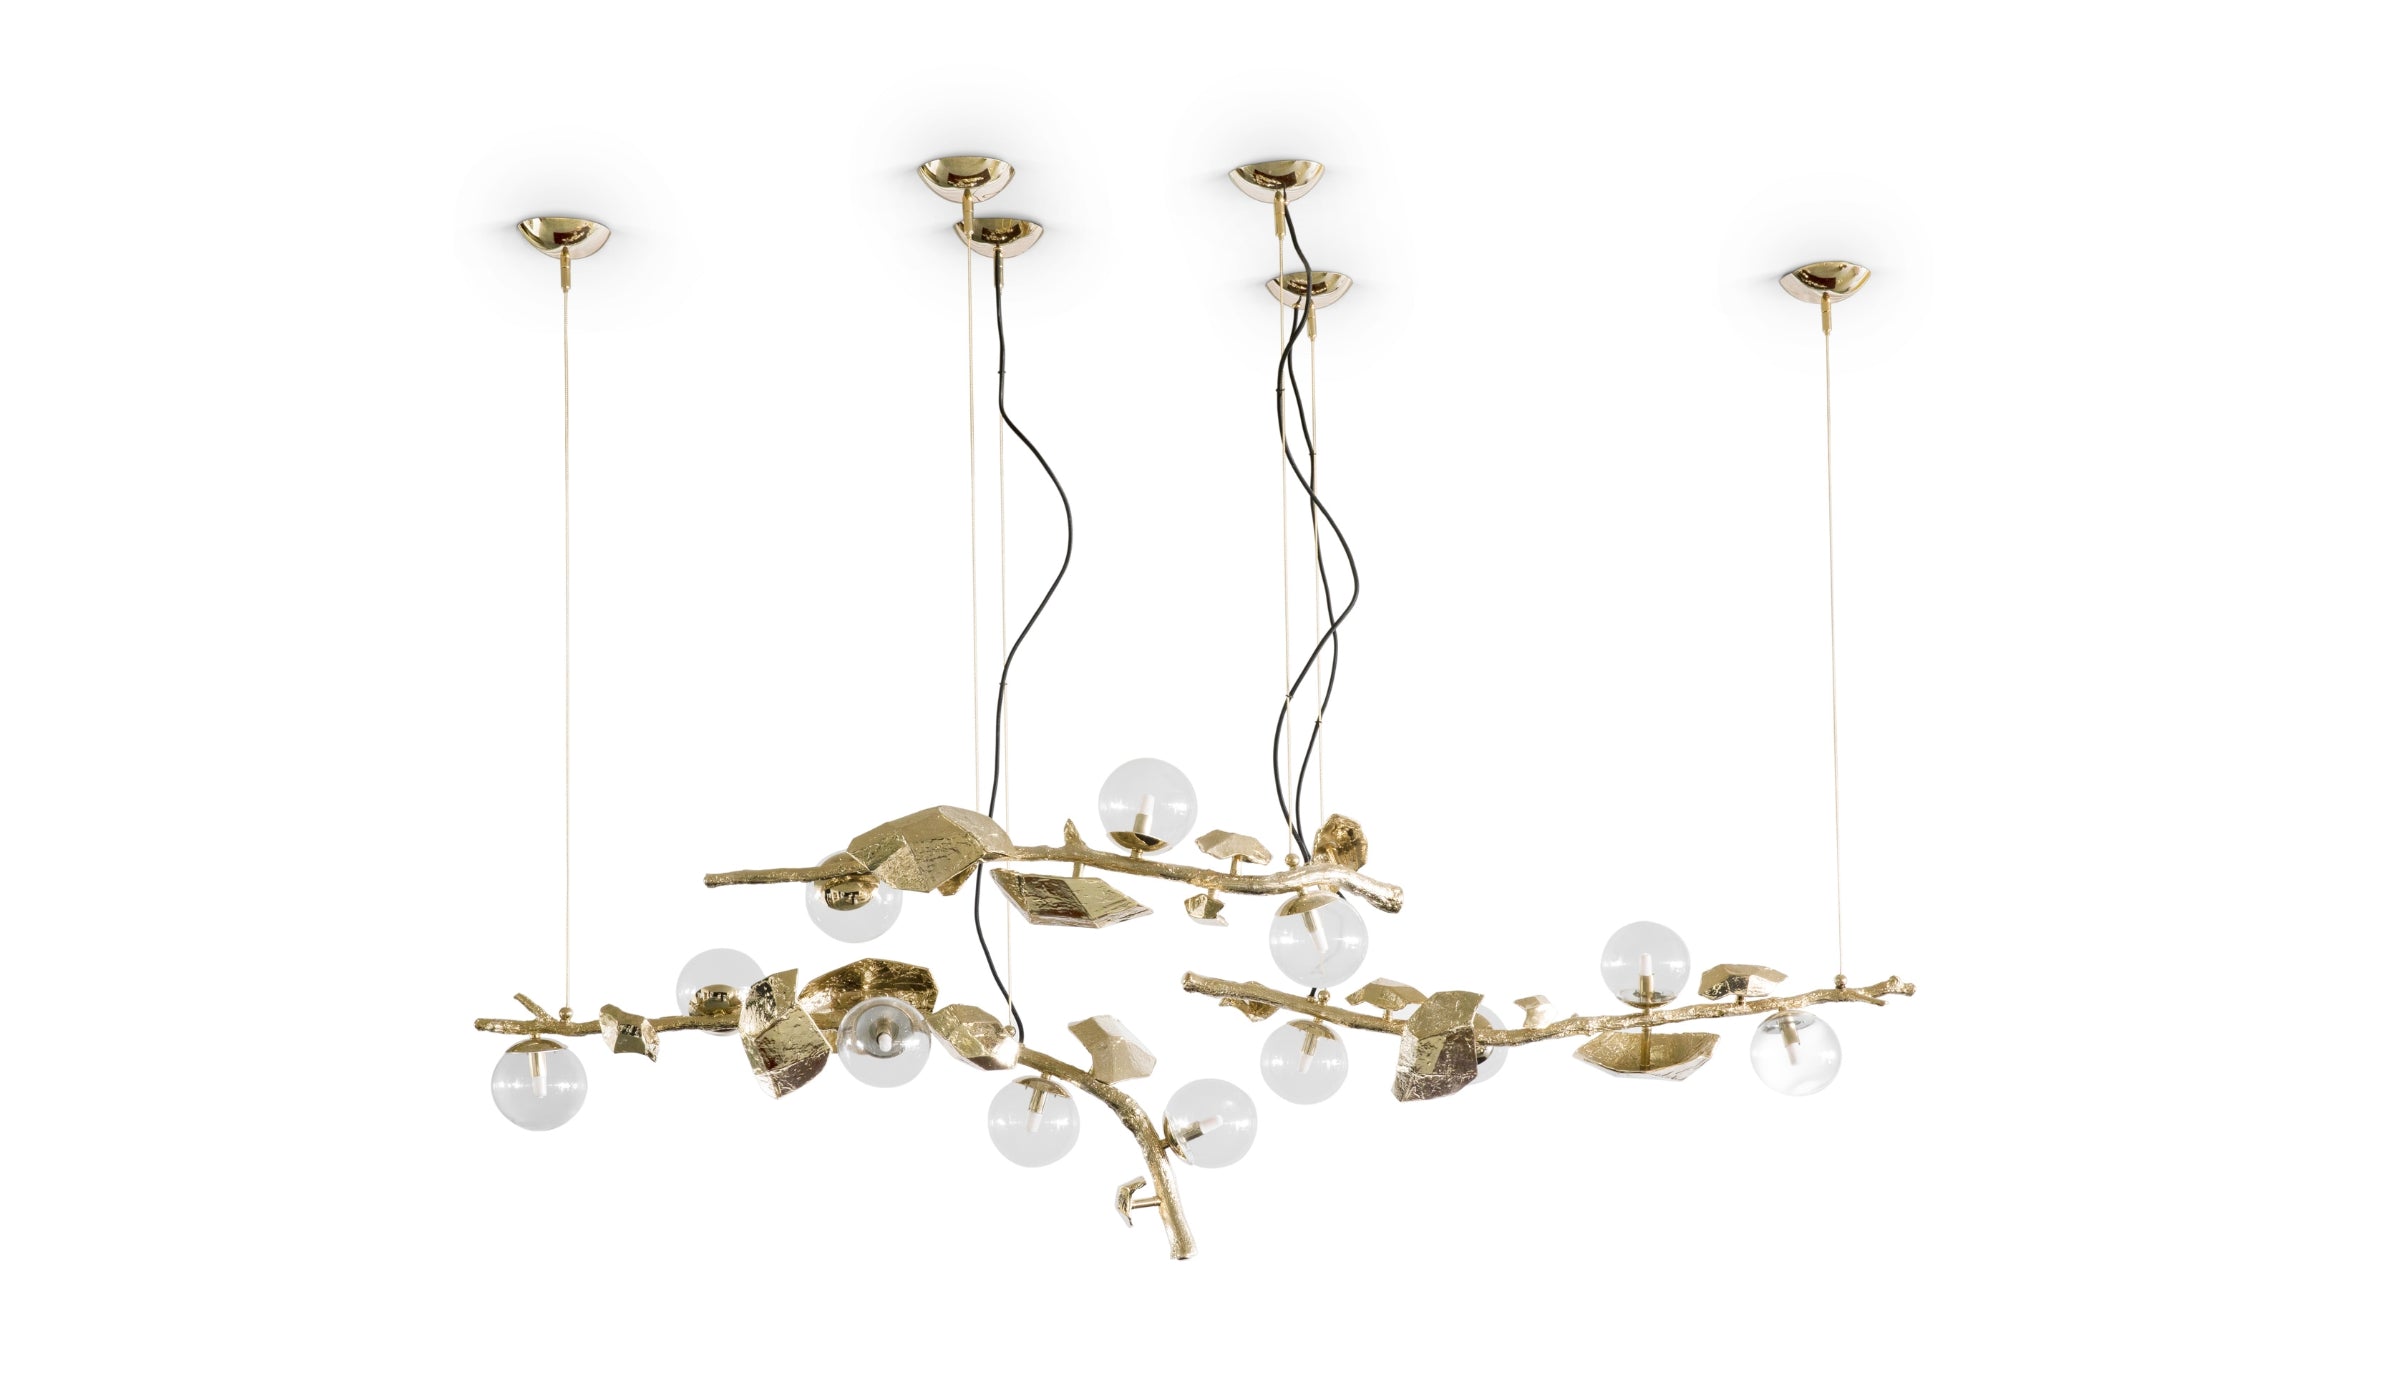 Hera - Luxurious triple pendant light in polished brass and glass for contemporary spaces